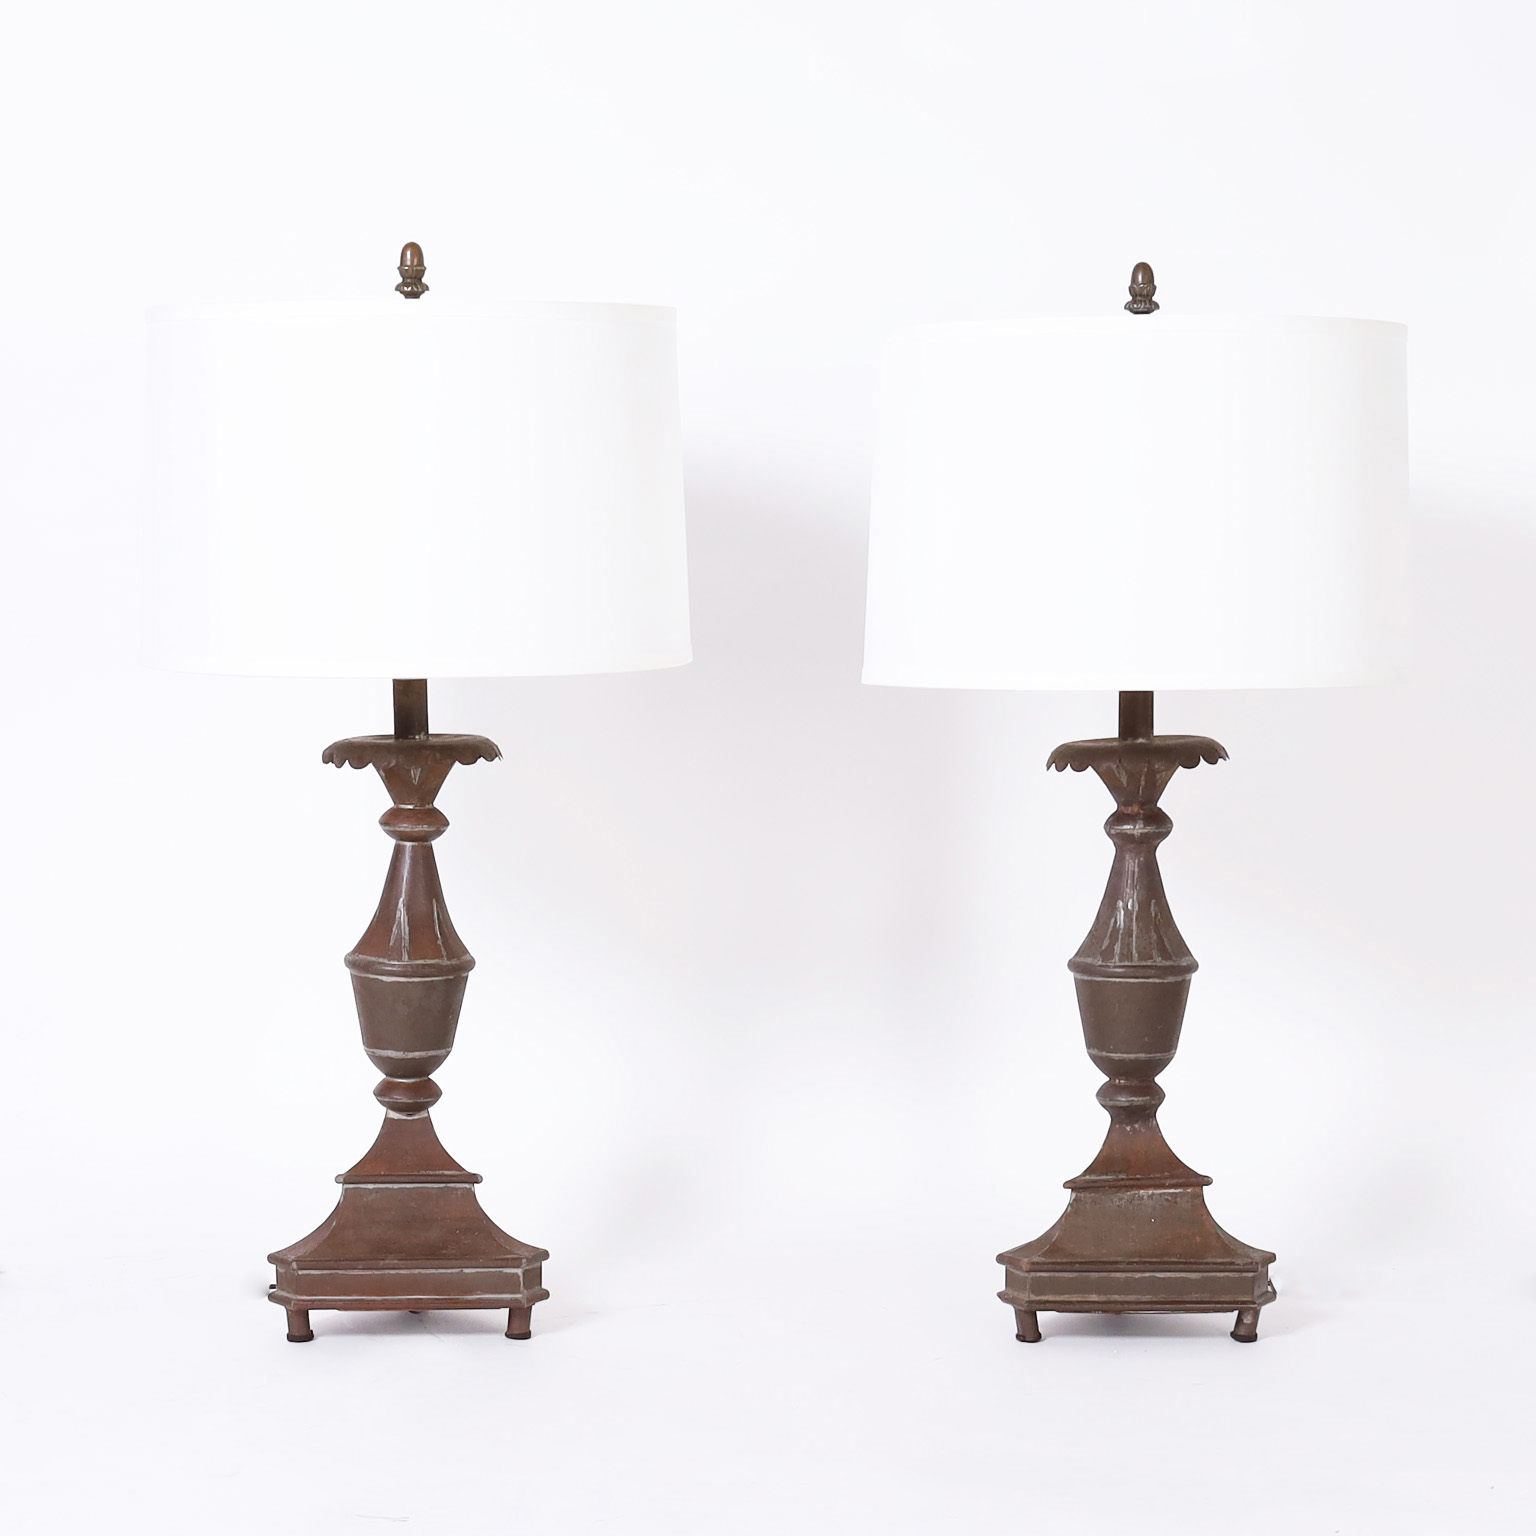 Pair of Antique French Provincial Neoclassic Tin Table Lamps